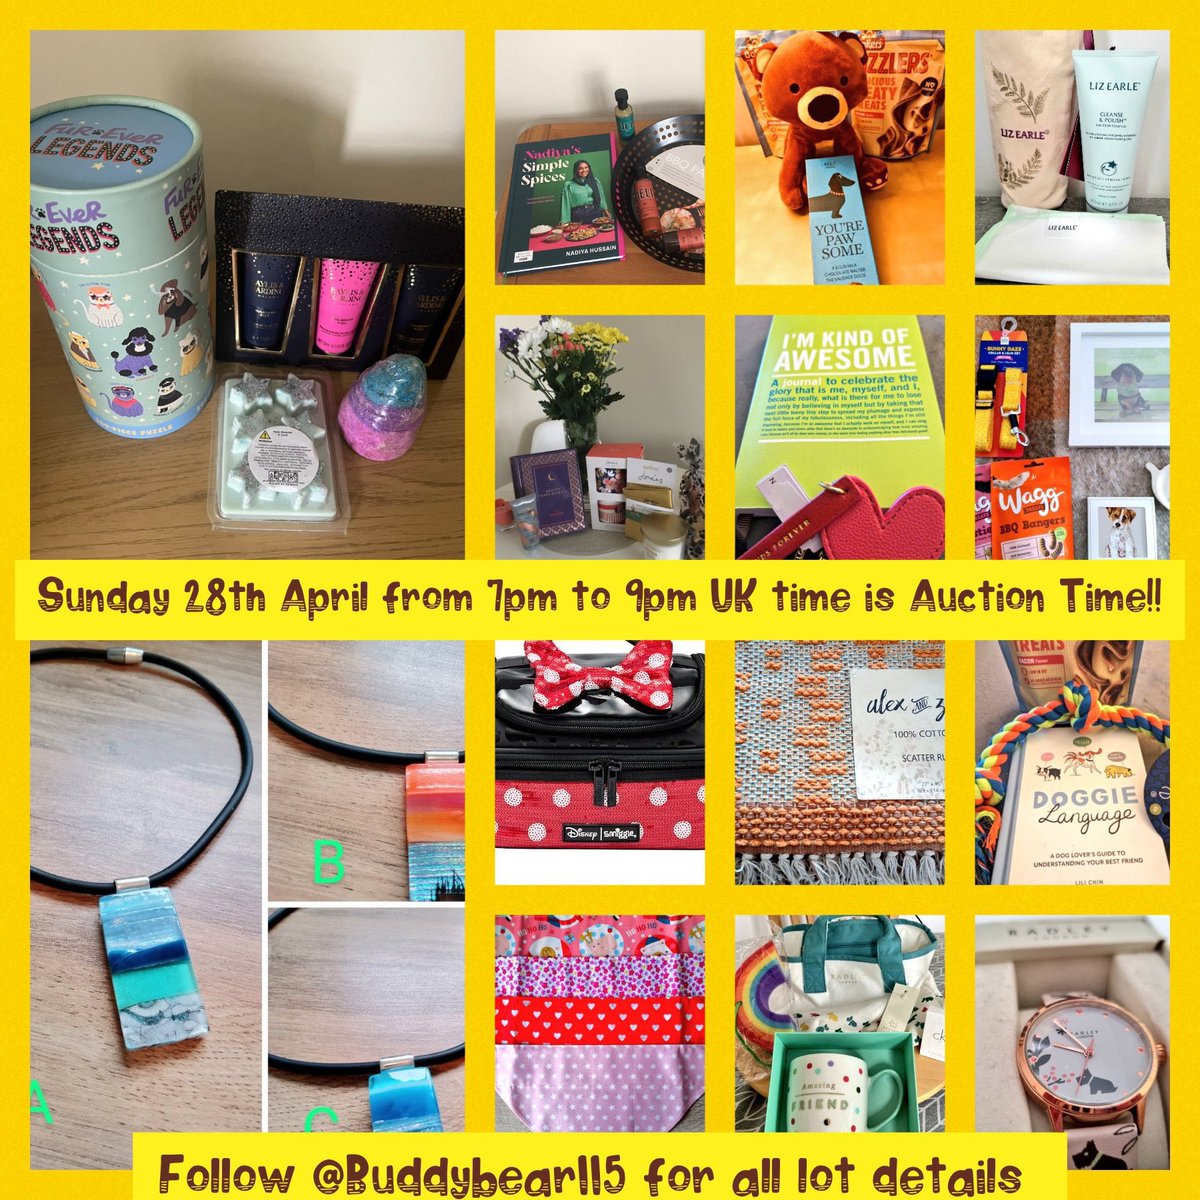 #k9hour abundance of fantastic lots for you to bid on in our forthcoming Fundraising Auction on Sunday 28 April plz join us from 7pm til 9pm #TeamZay